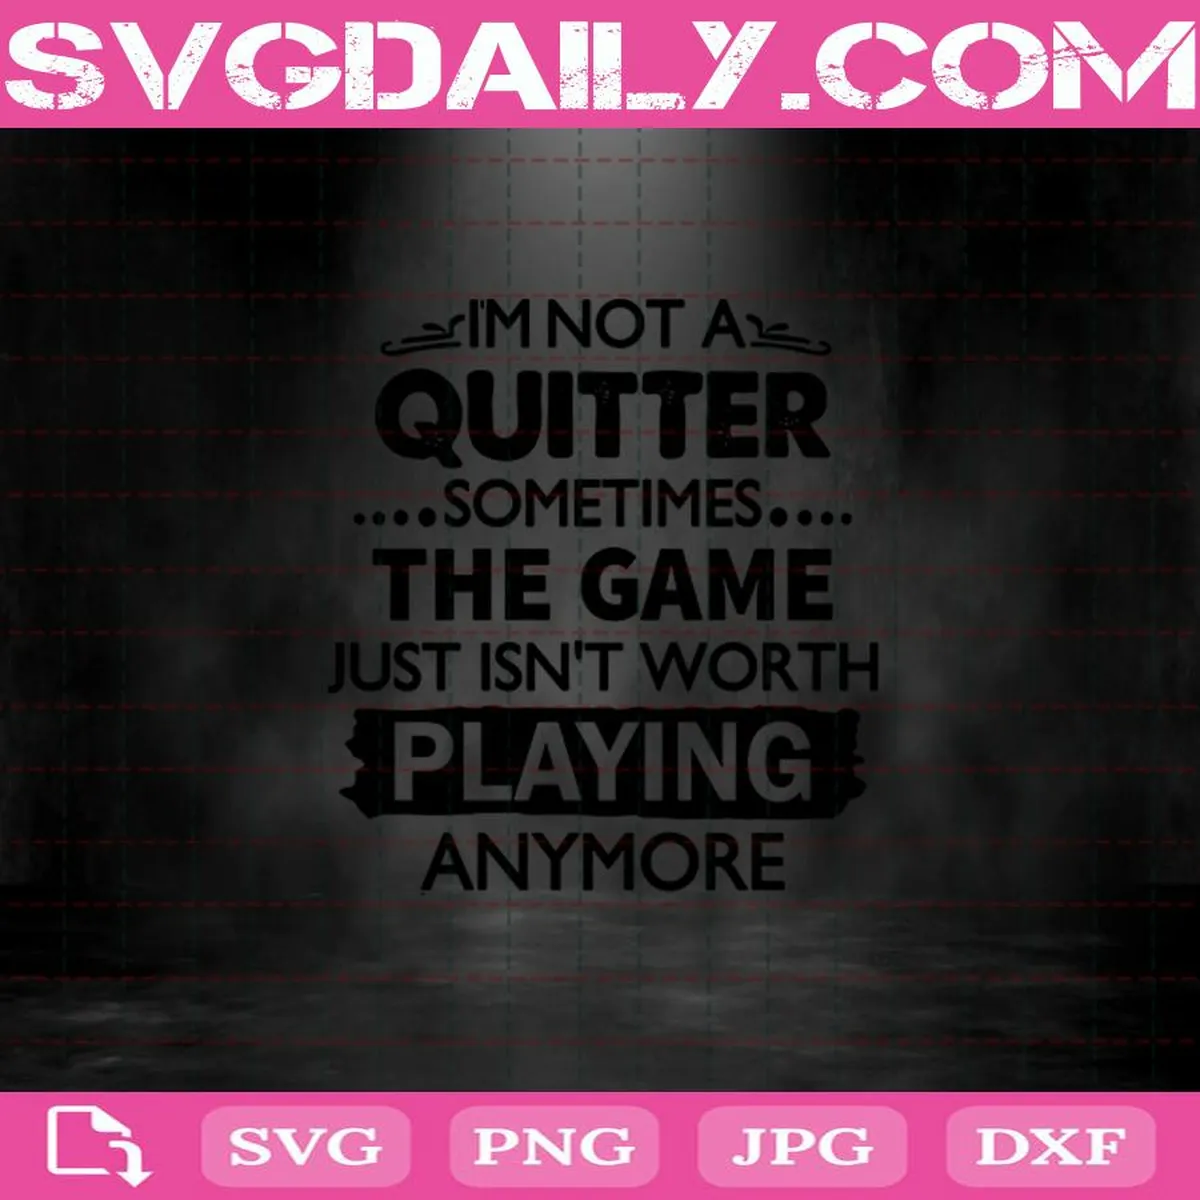 I’m Not A Quitter Sometimes The Game Just Isn’t Worth Playing Anymore Svg, The Game Svg, Playing Svg